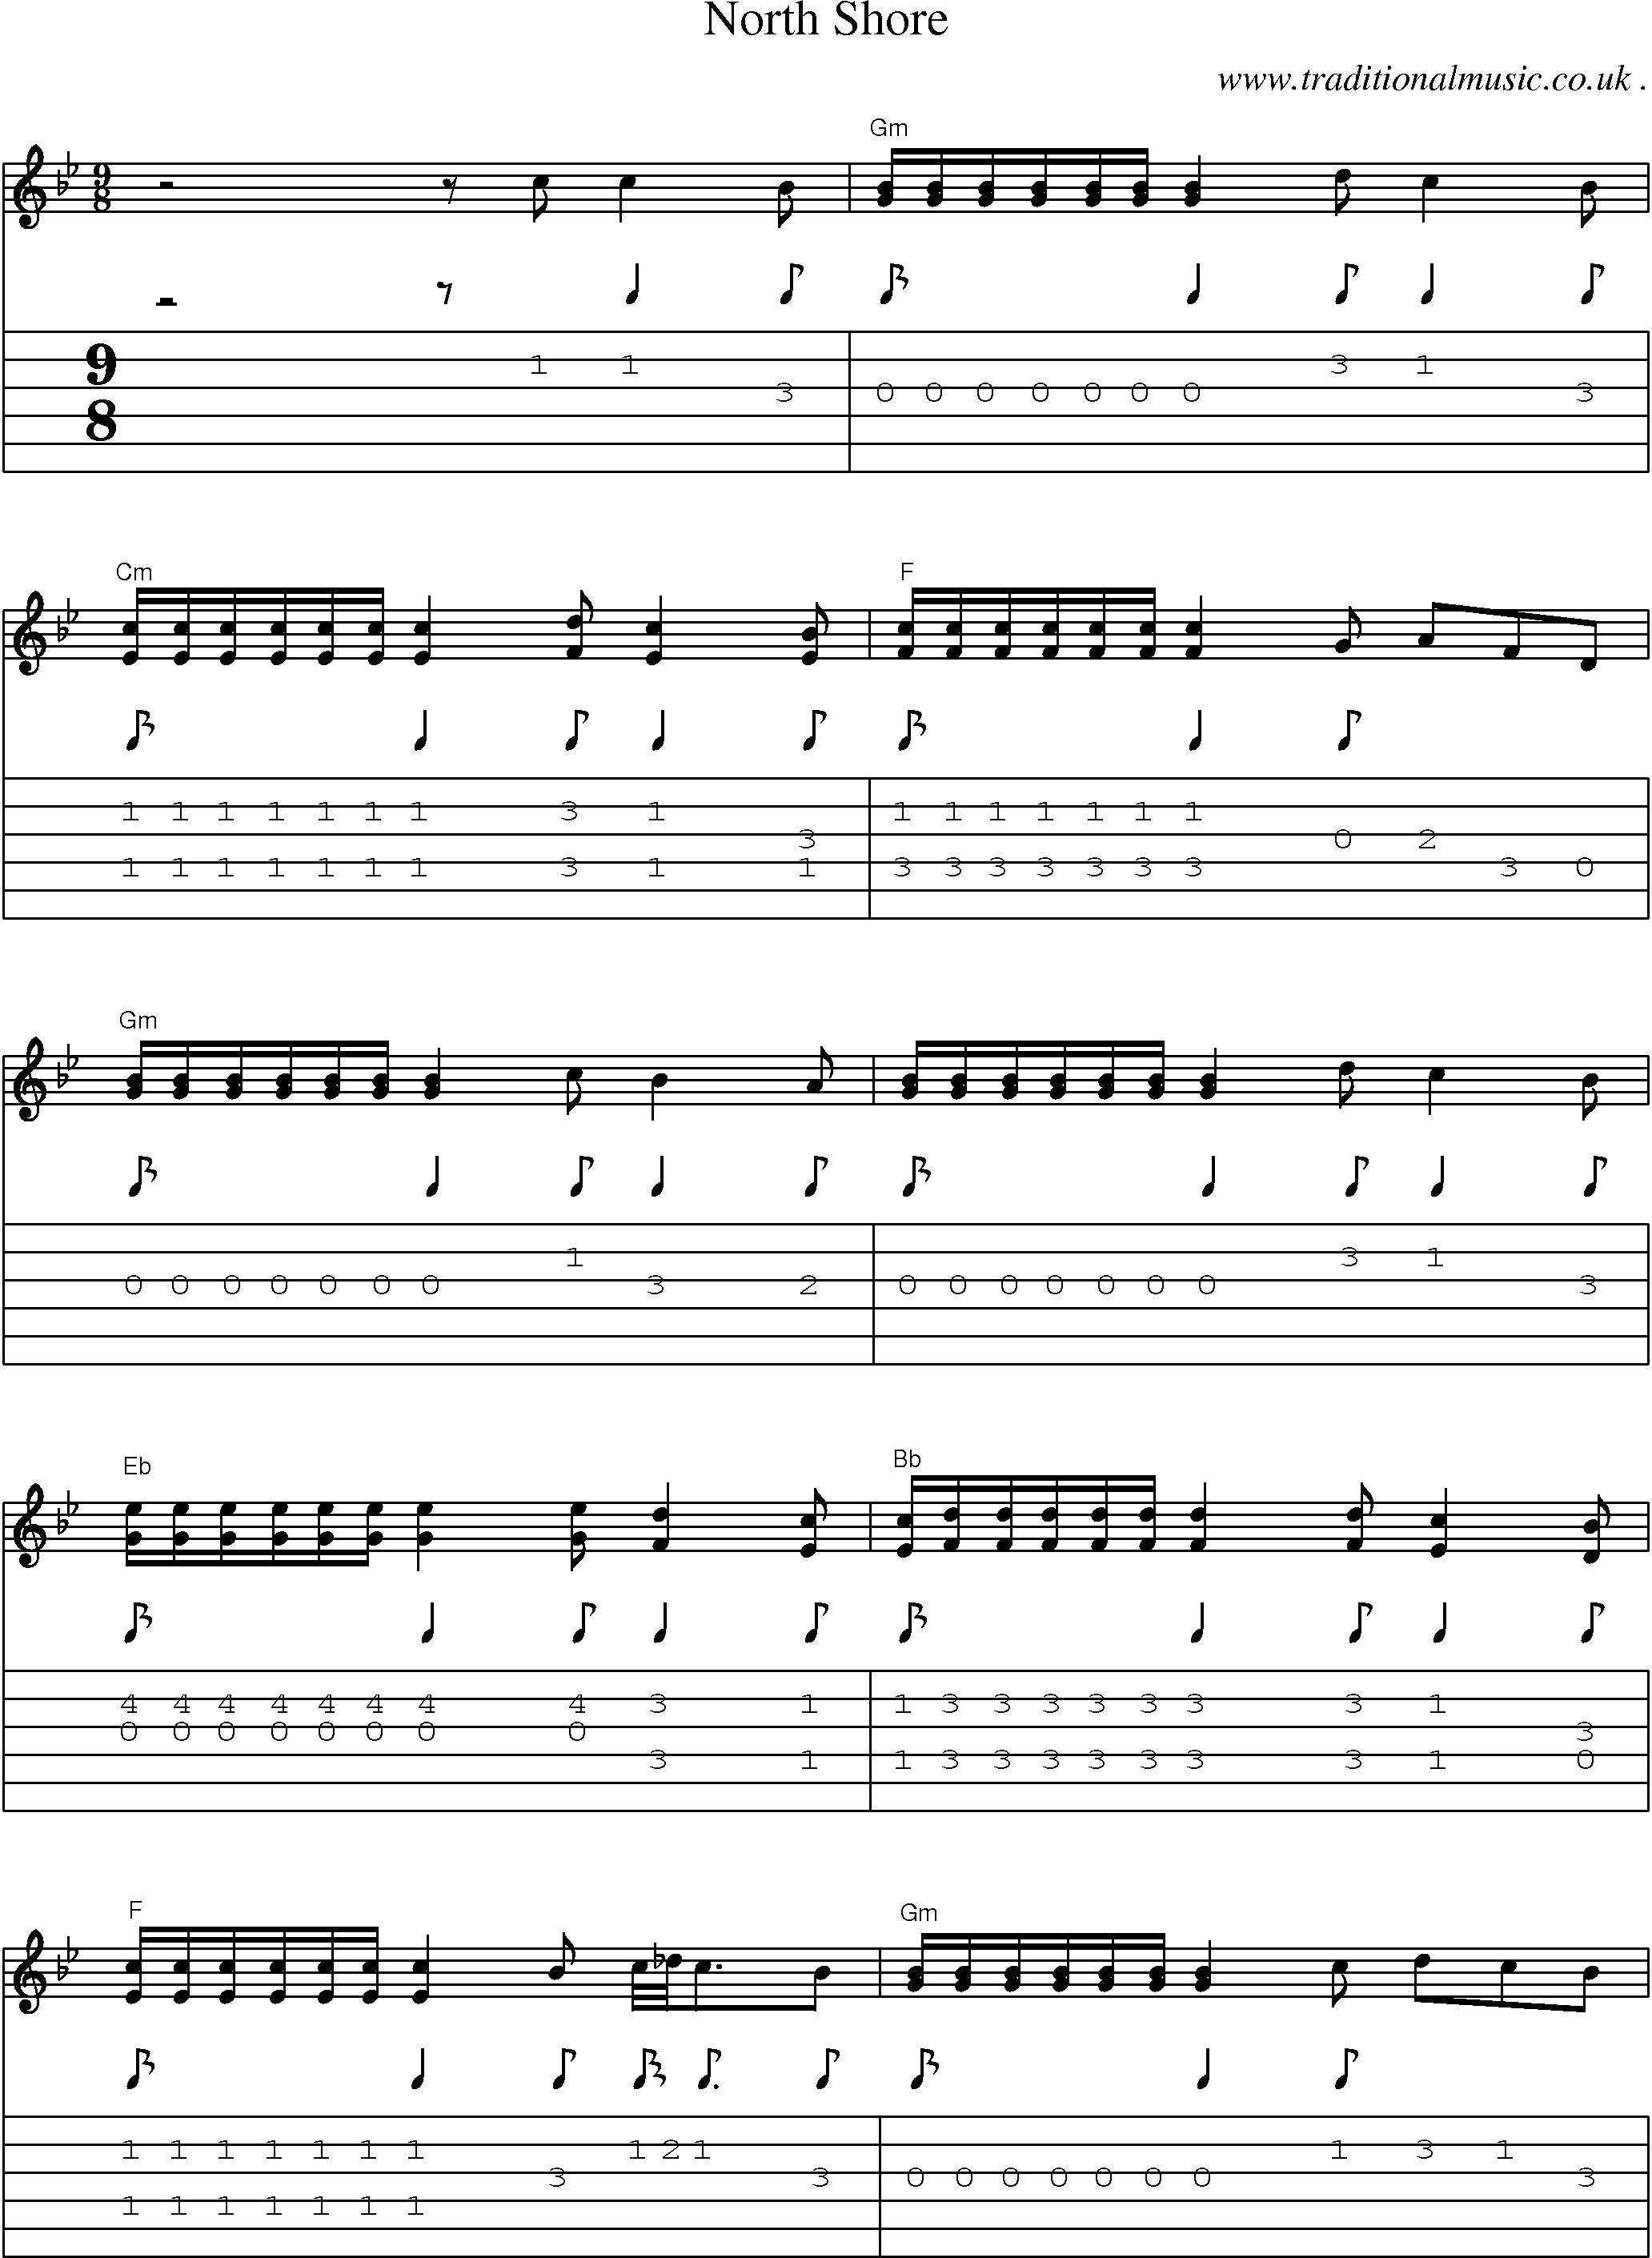 Music Score and Guitar Tabs for North Shore